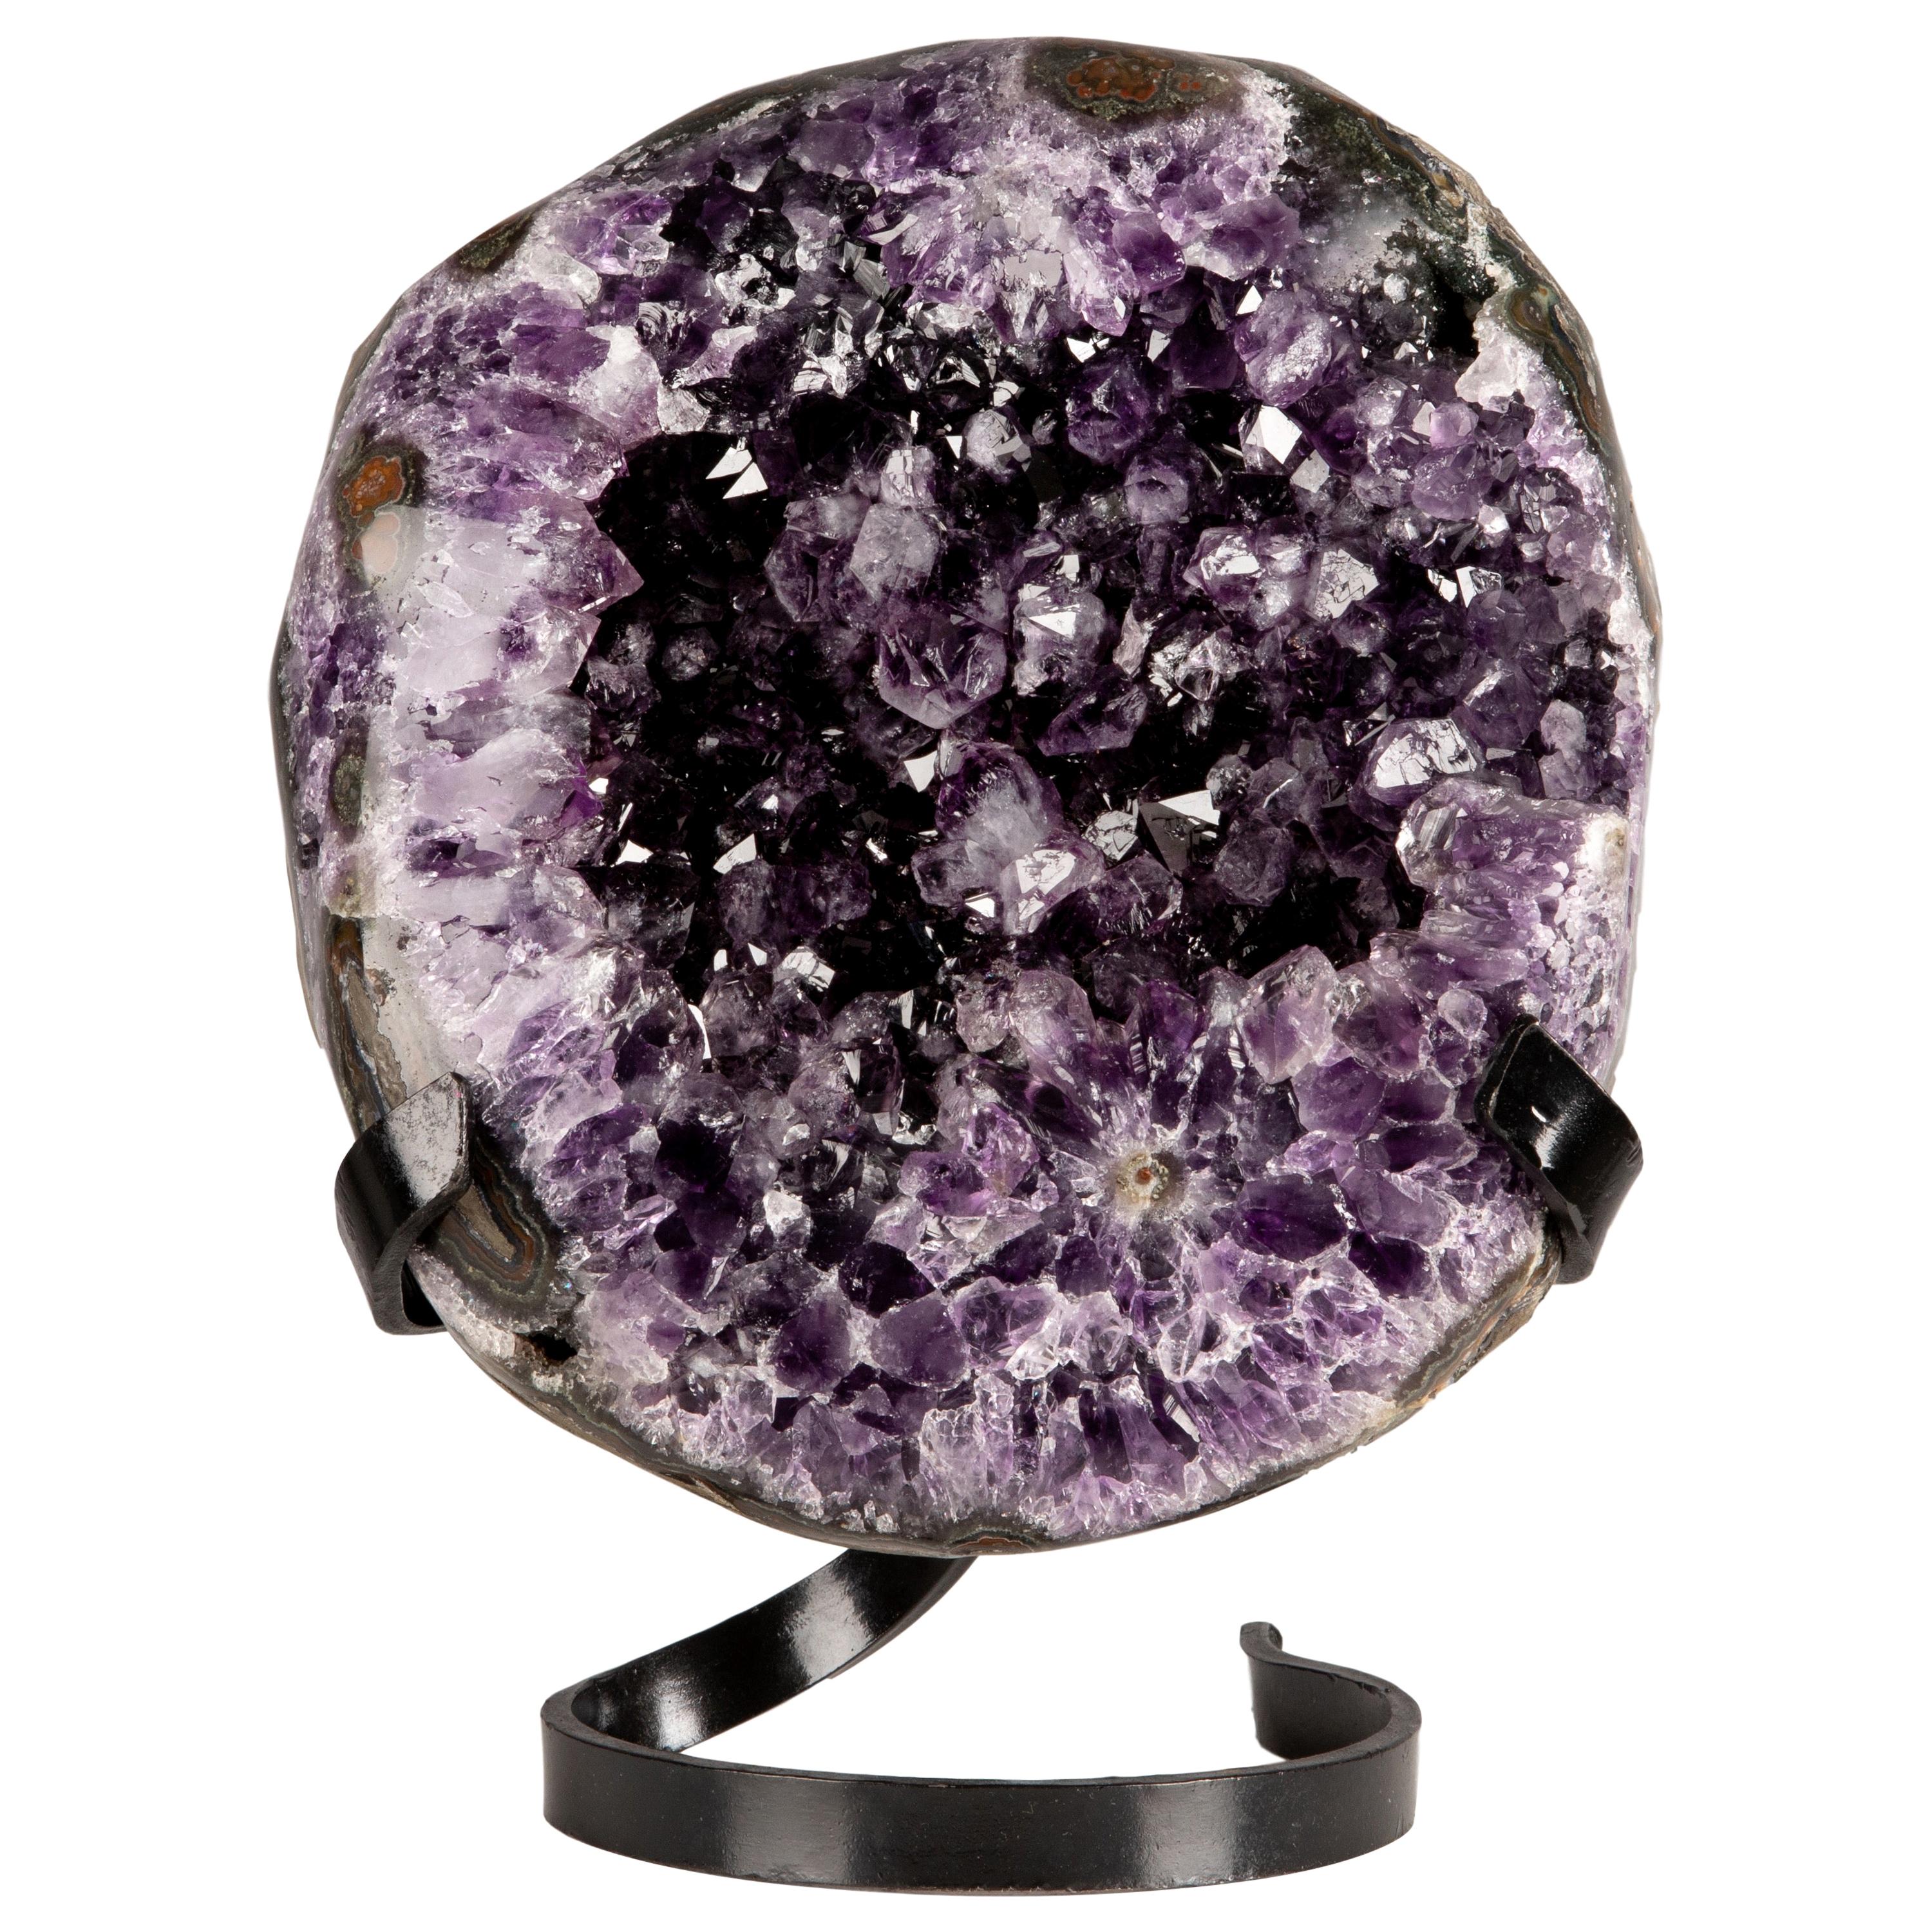 Circular Polished Amethyst Formation - Vibrant Mineral Art For Sale